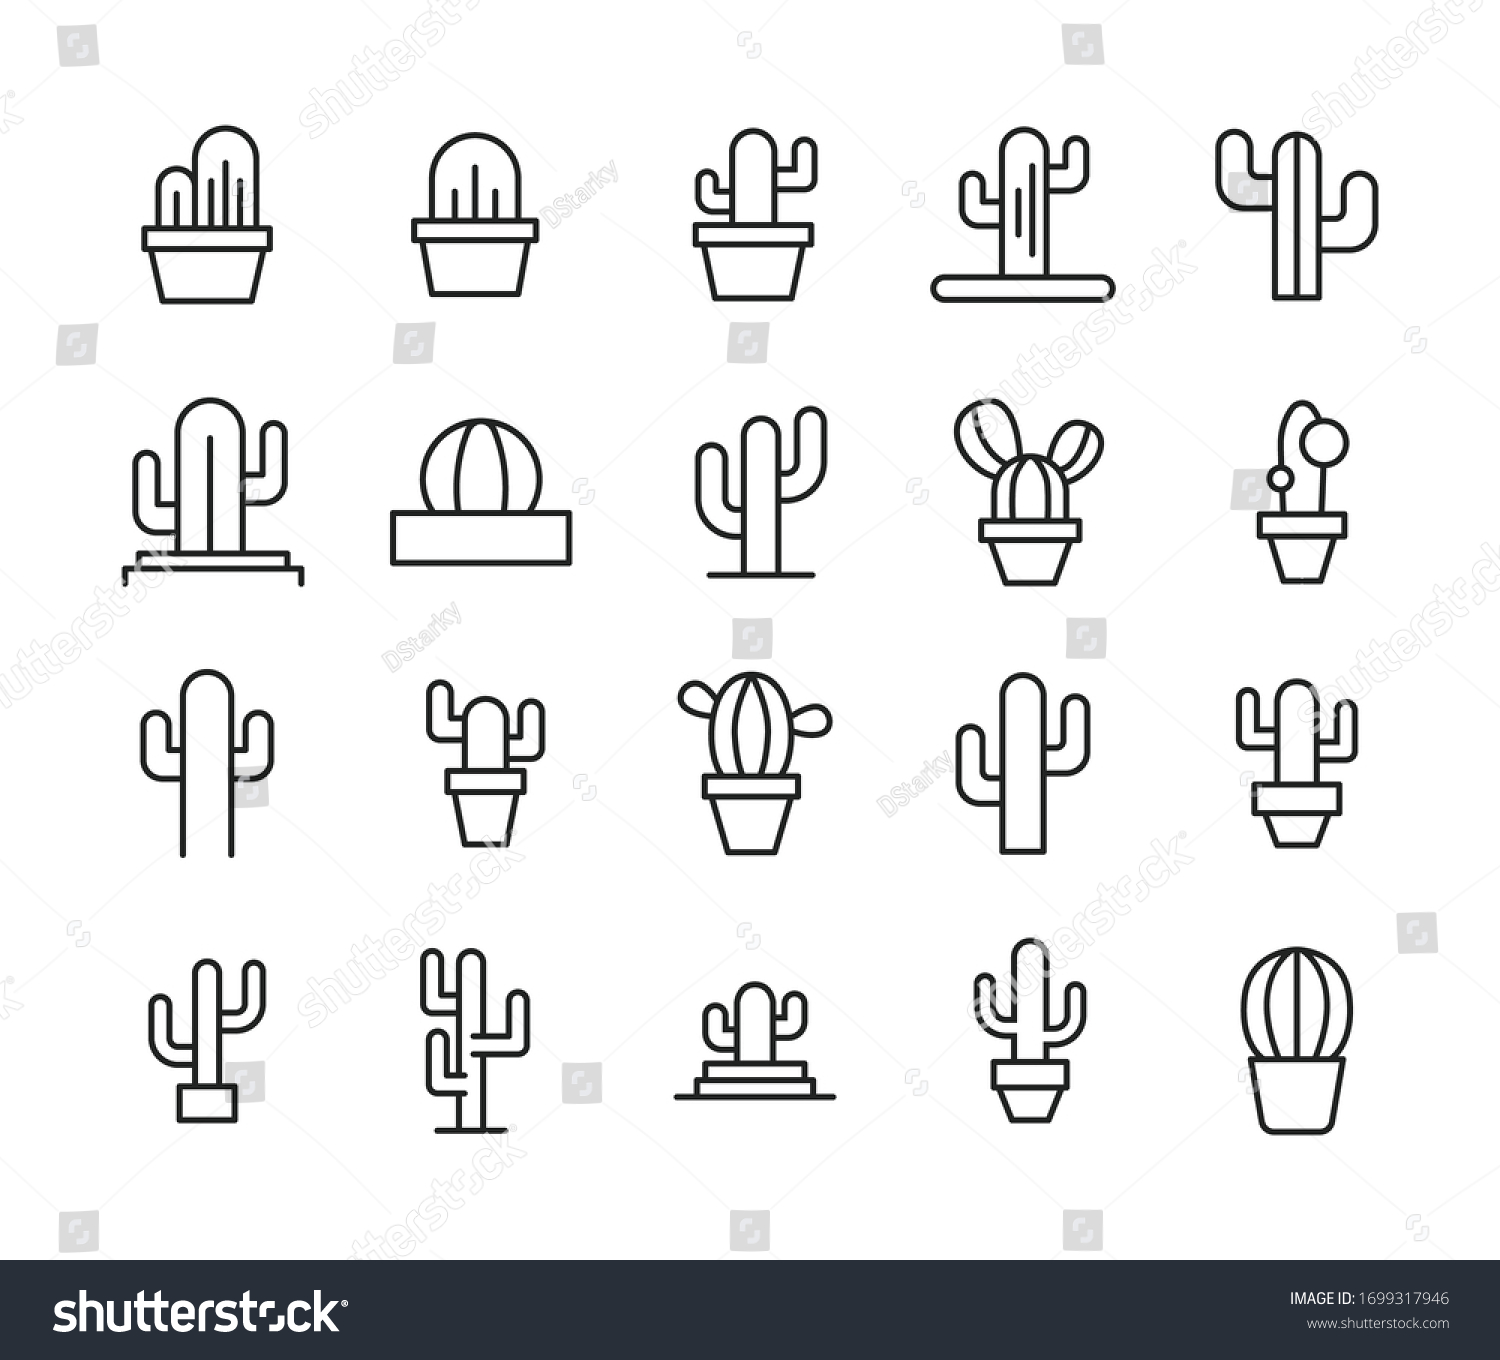 SVG of Icon set of cactus. Editable vector pictograms isolated on a white background. Trendy outline symbols for mobile apps and website design. Premium pack of icons in trendy line style. svg